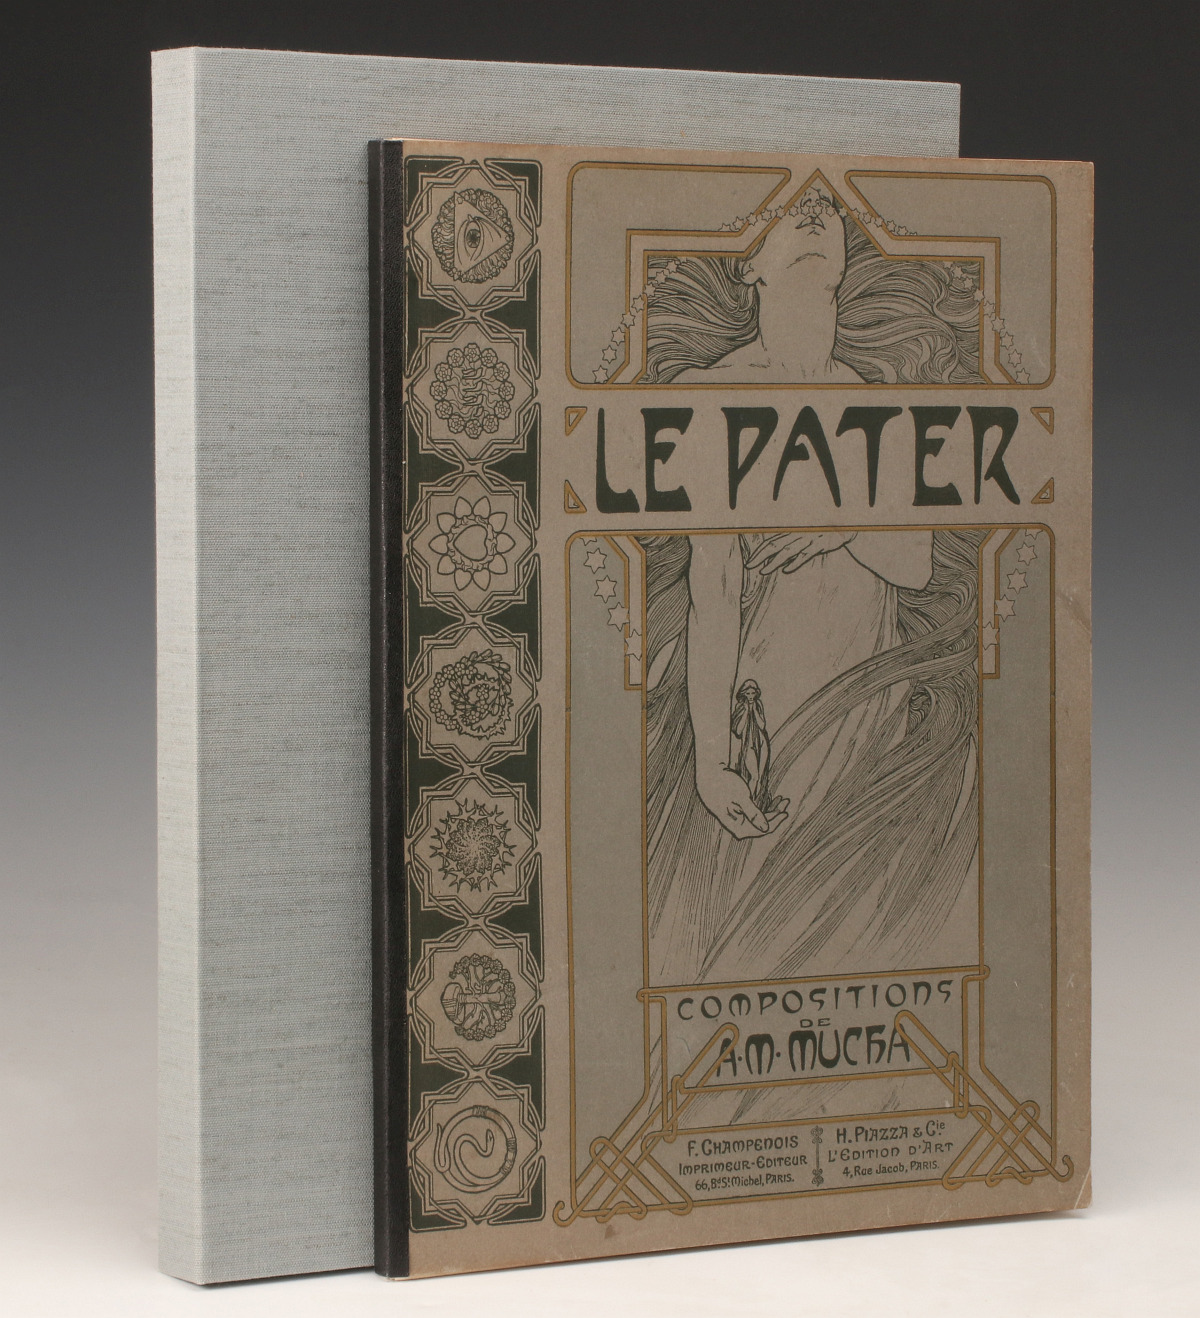 ALPHONSE MUCHA LE PATER 1899 LIMITED EDITION VOLUME